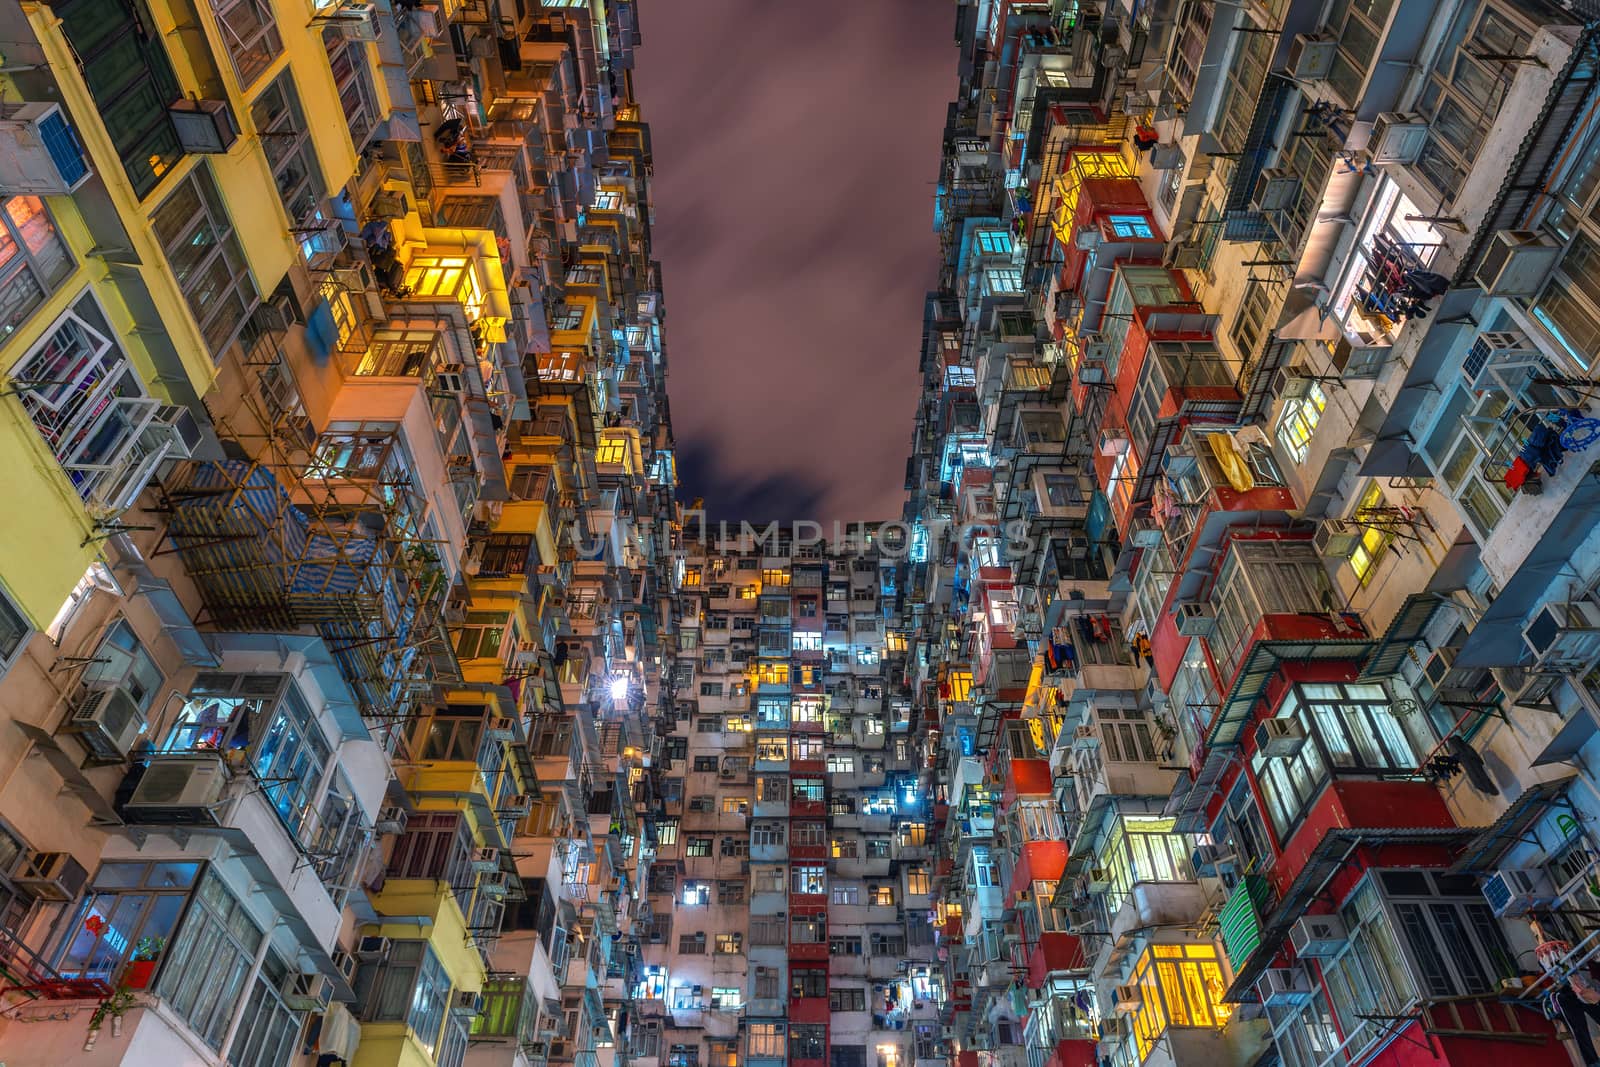 The old building at night, Hong Kong. by gutarphotoghaphy